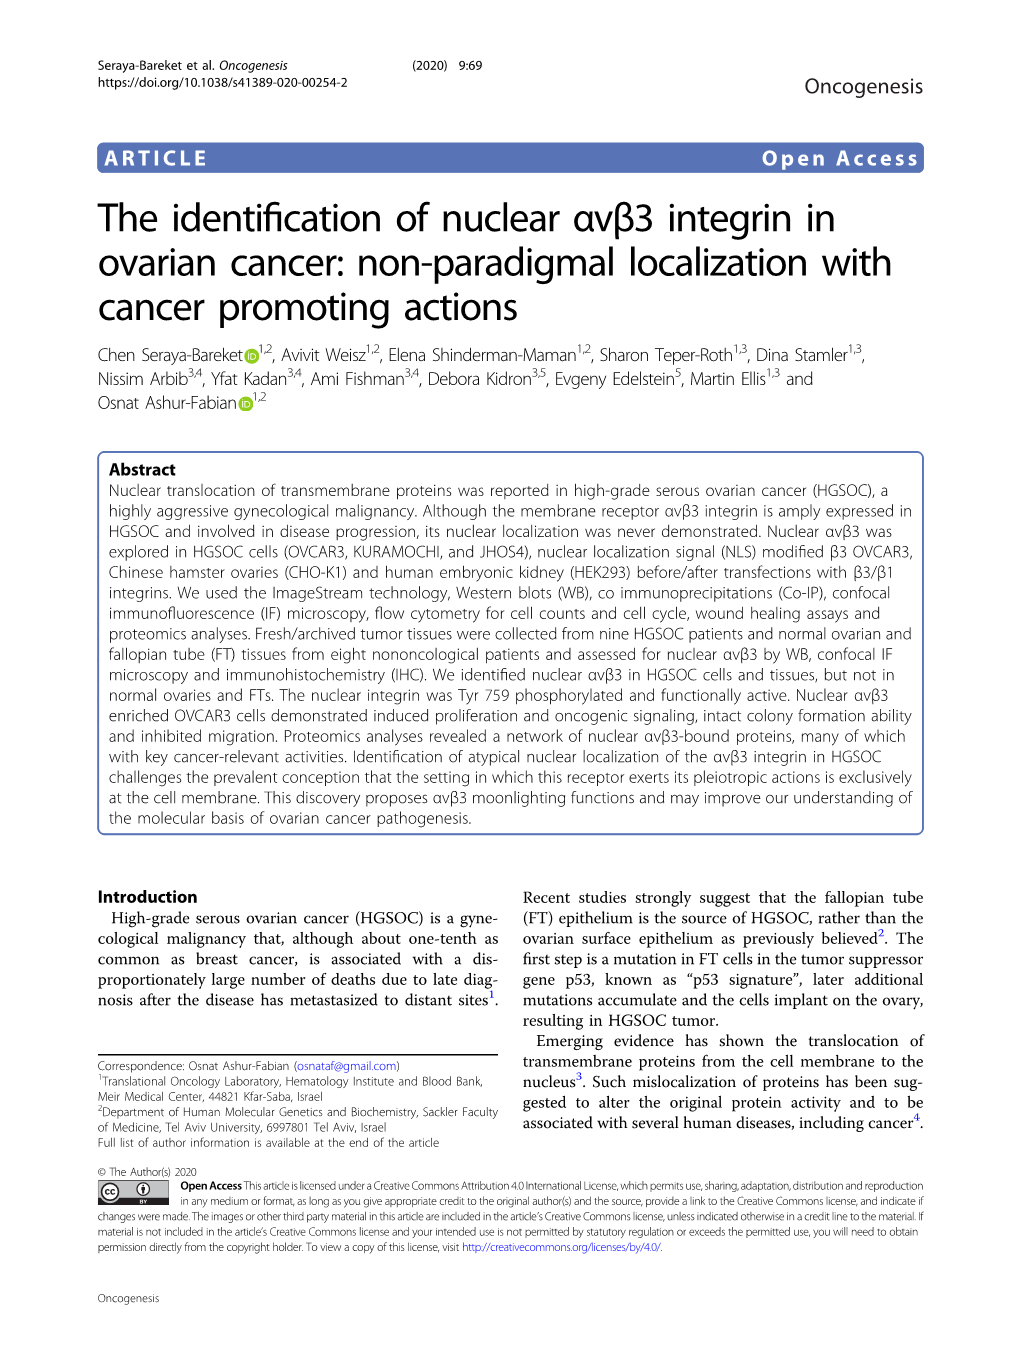 The Identification of Nuclear Αvβ3 Integrin in Ovarian Cancer